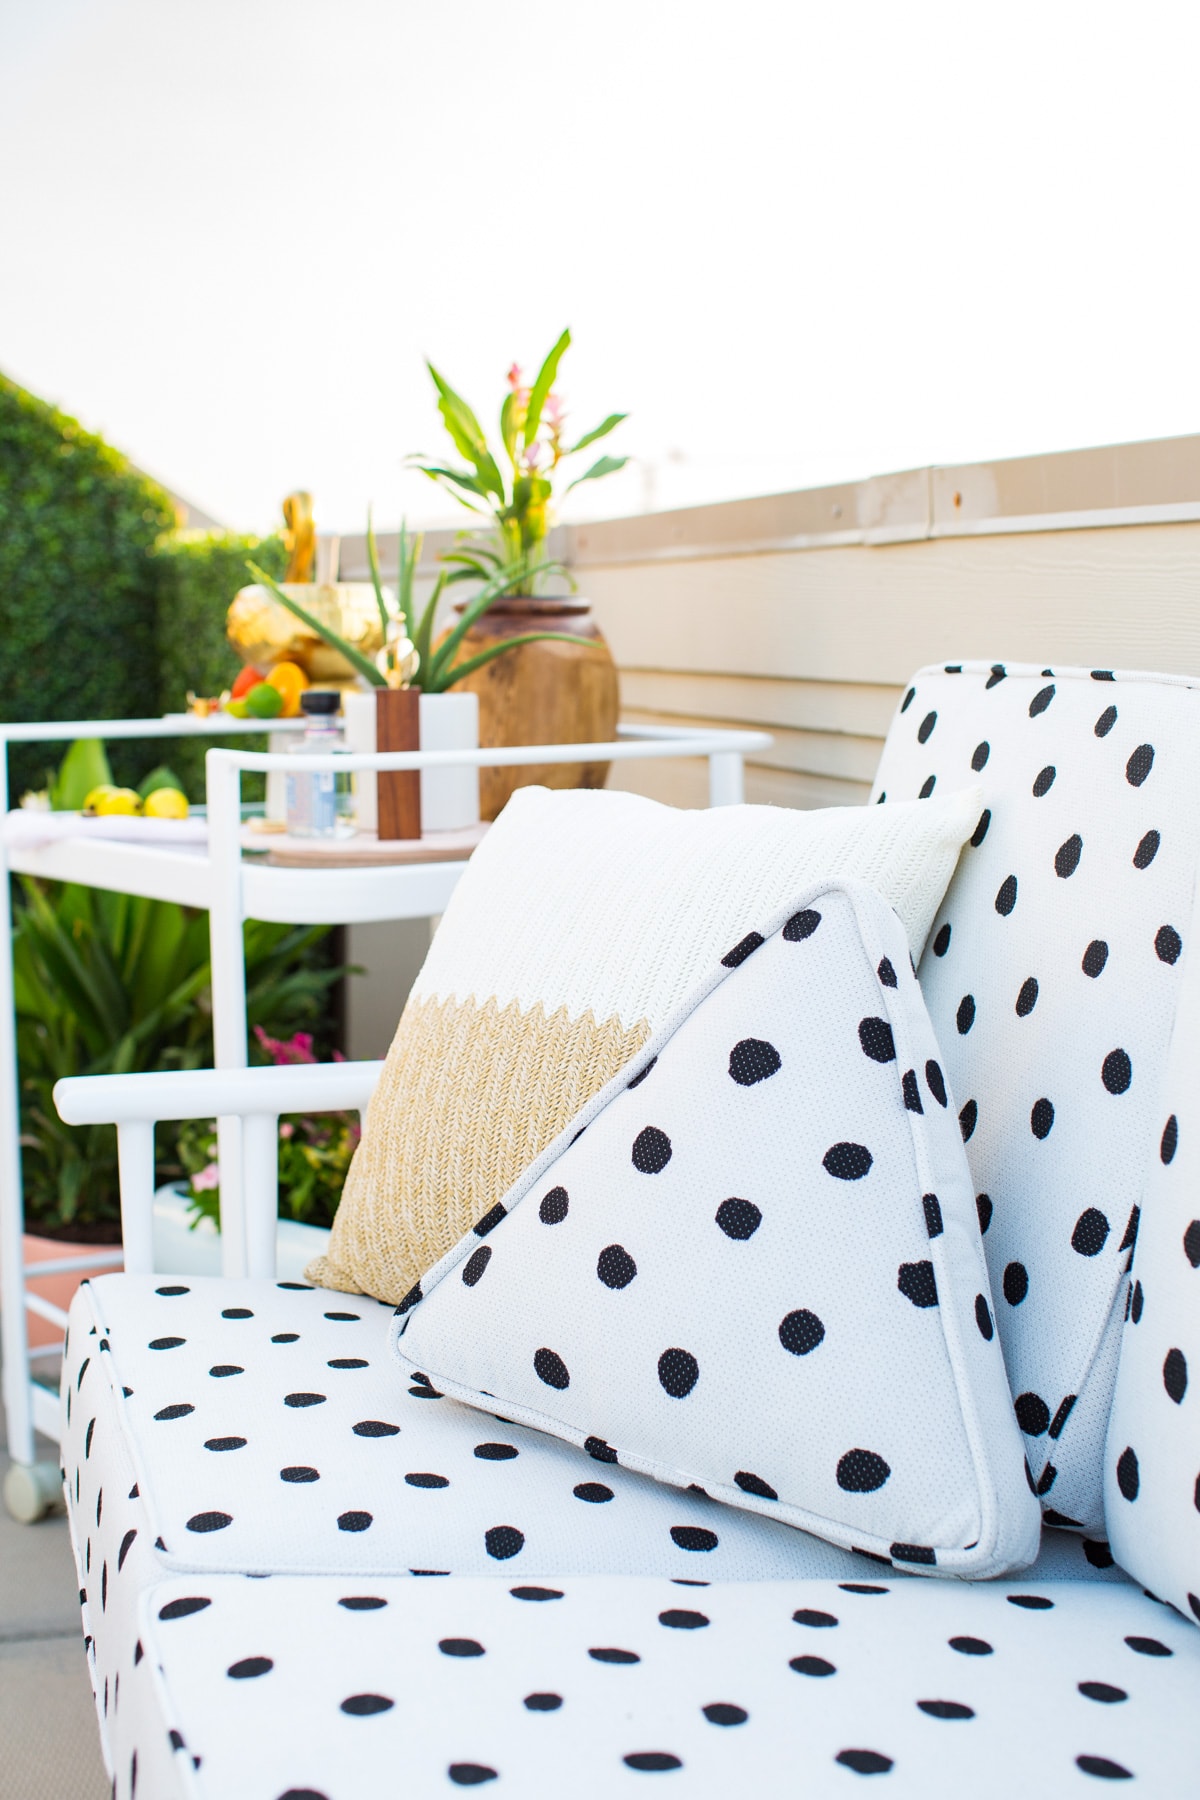 Our Downtown Rooftop Patio Makeover Reveal by top Houston lifestyle blogger Ashley Rose of Sugar & Cloth #makeover #beforeandafter #design #homedecor